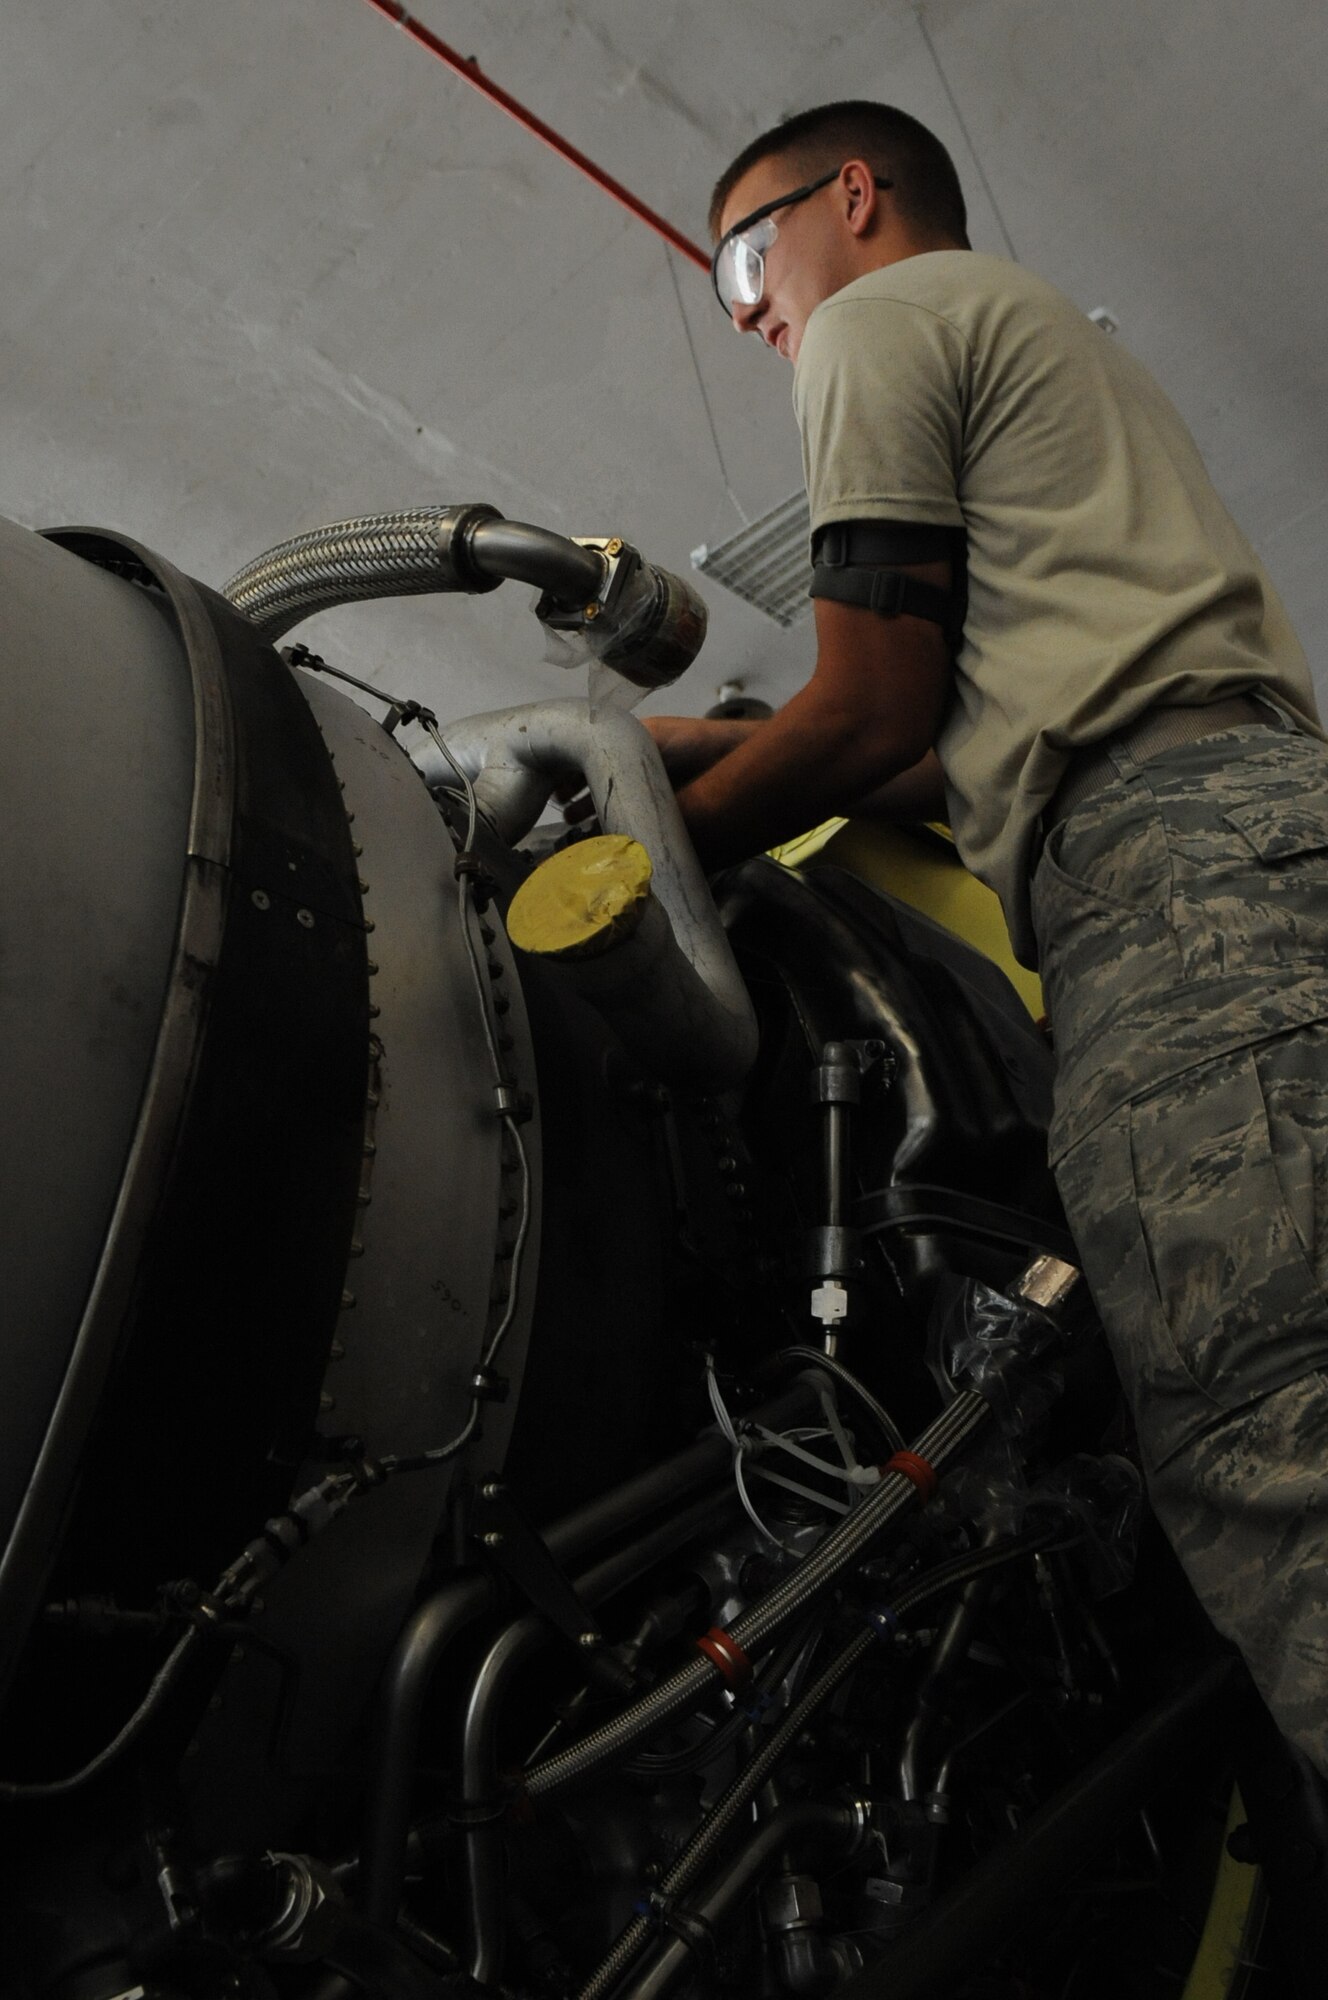 Senior Airman Colton Chandler, 2nd Maintenance Squadron aerospace propulsion craftsman, installs an air duct for a TF33/P-103 turbofan engine on Barksdale Air Force Base, La., Aug. 13. When a refurbished engine arrives from the Maintenance Depot at Tinker AFB, Okla., propulsion Airmen must install key components so the engine is ready to be mounted on a B-52H Stratofortress when needed. (U.S. Air Force photo/Airman 1st Class Micaiah Anthony)(RELEASED)